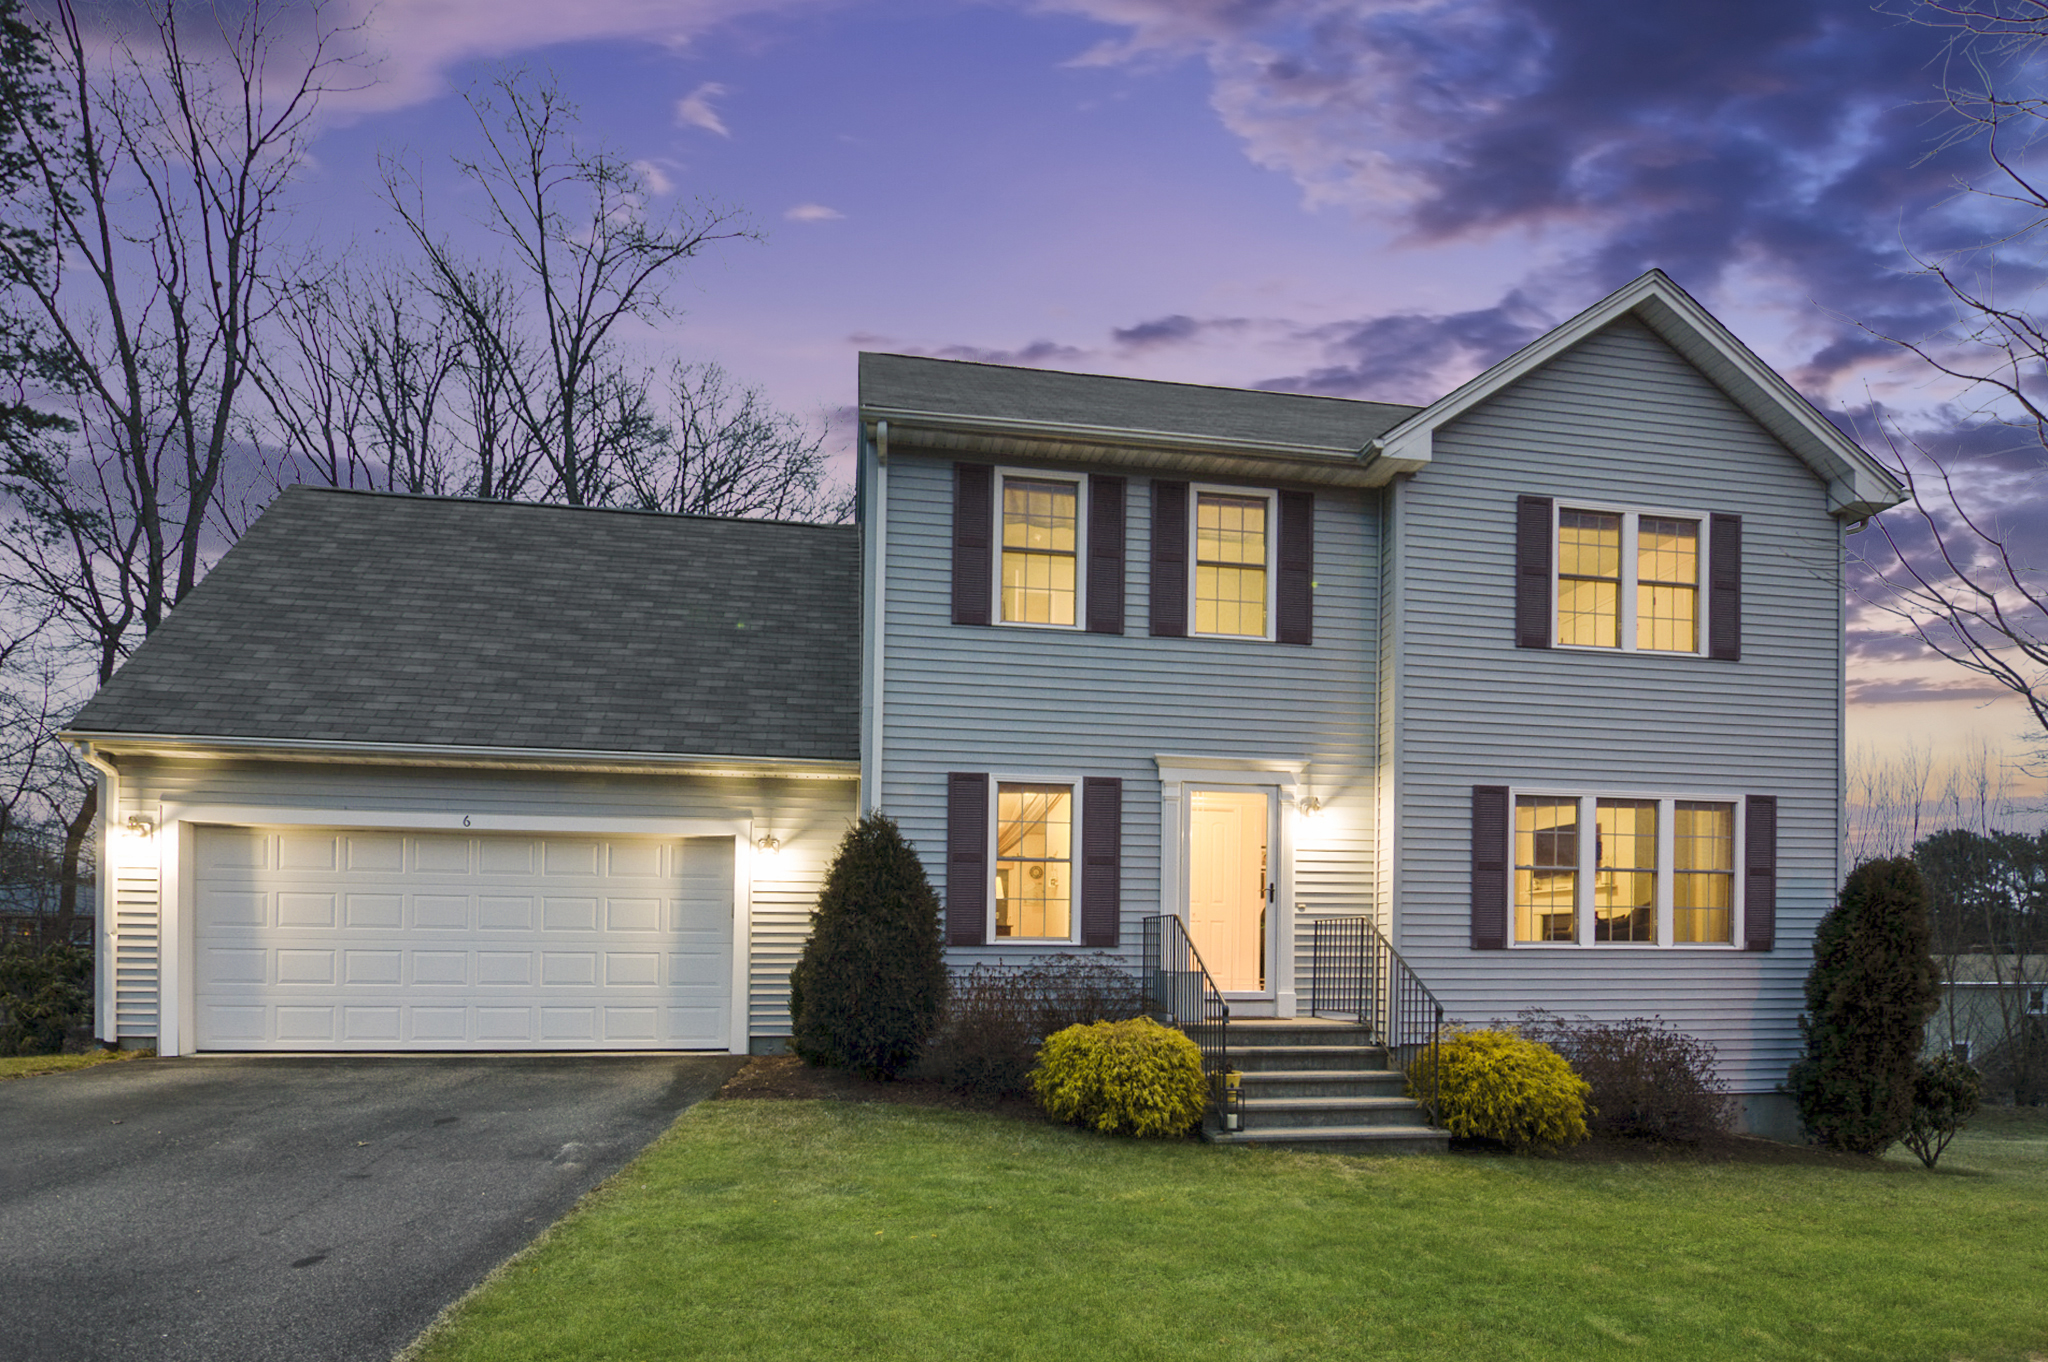 6 Sweet Fern Ln, Coventry, Rhode Island I Sat 1/18 from 11:00-1:00PM